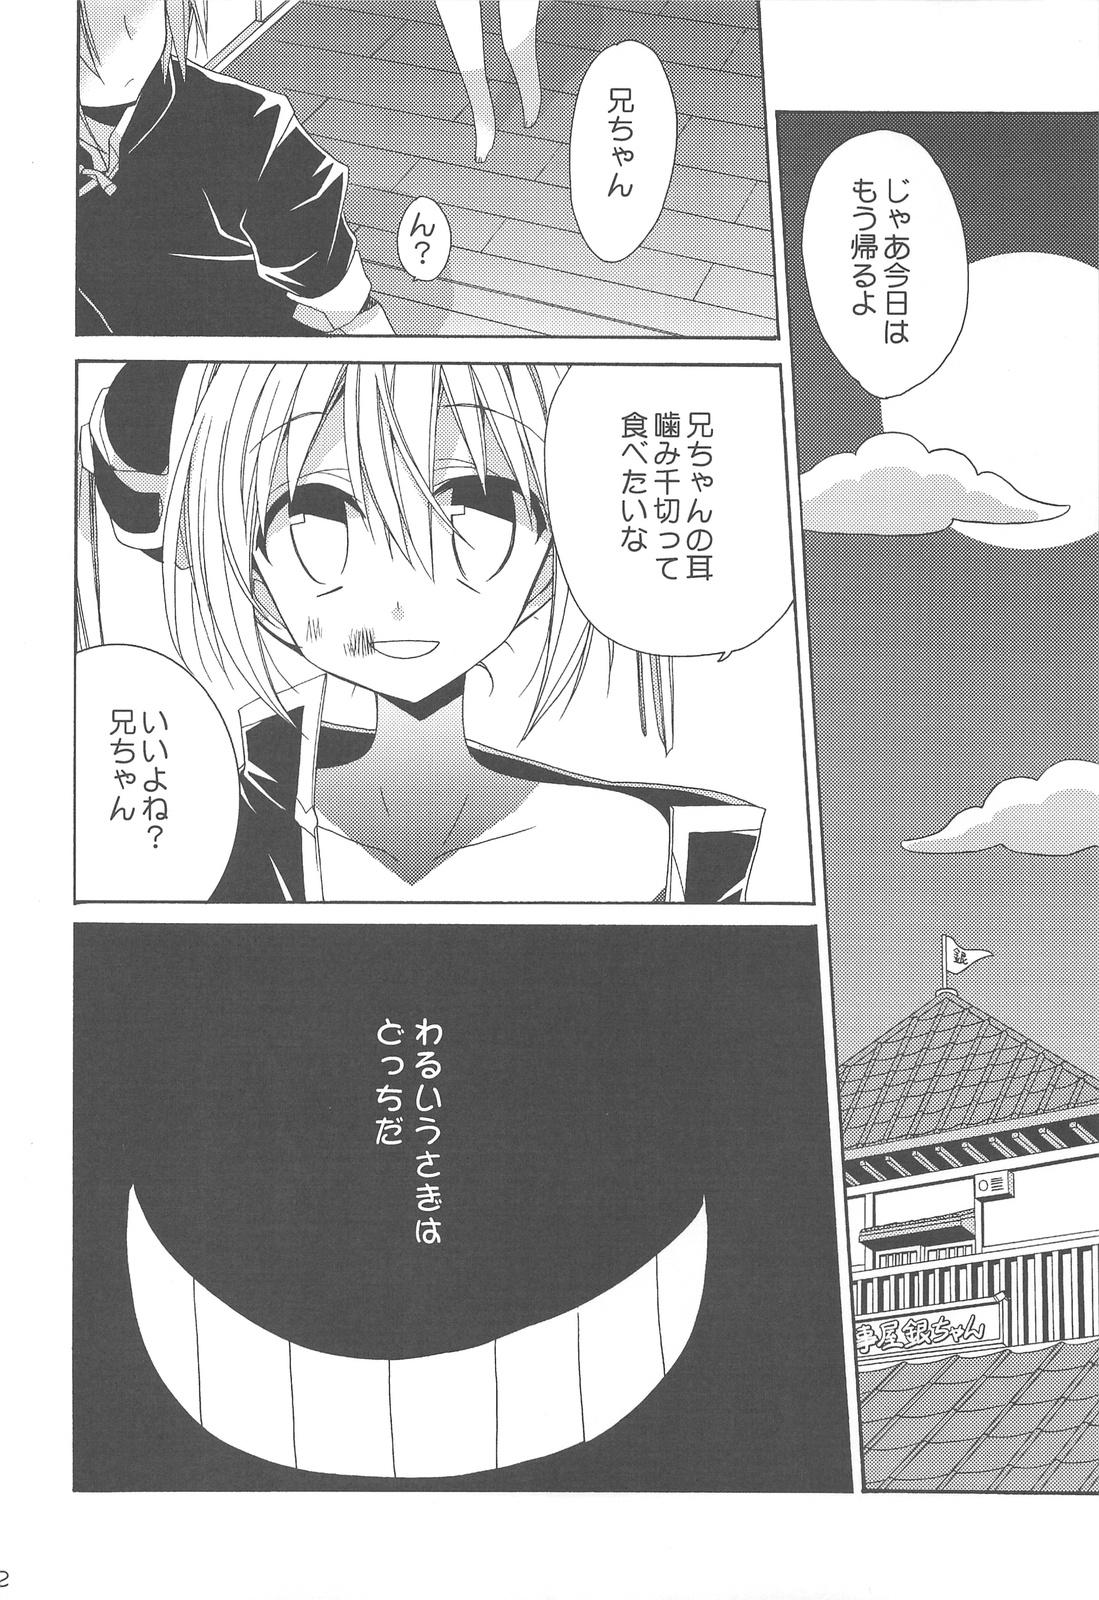 Thief heroine syndrome - Gintama Hidden Cam - Page 11